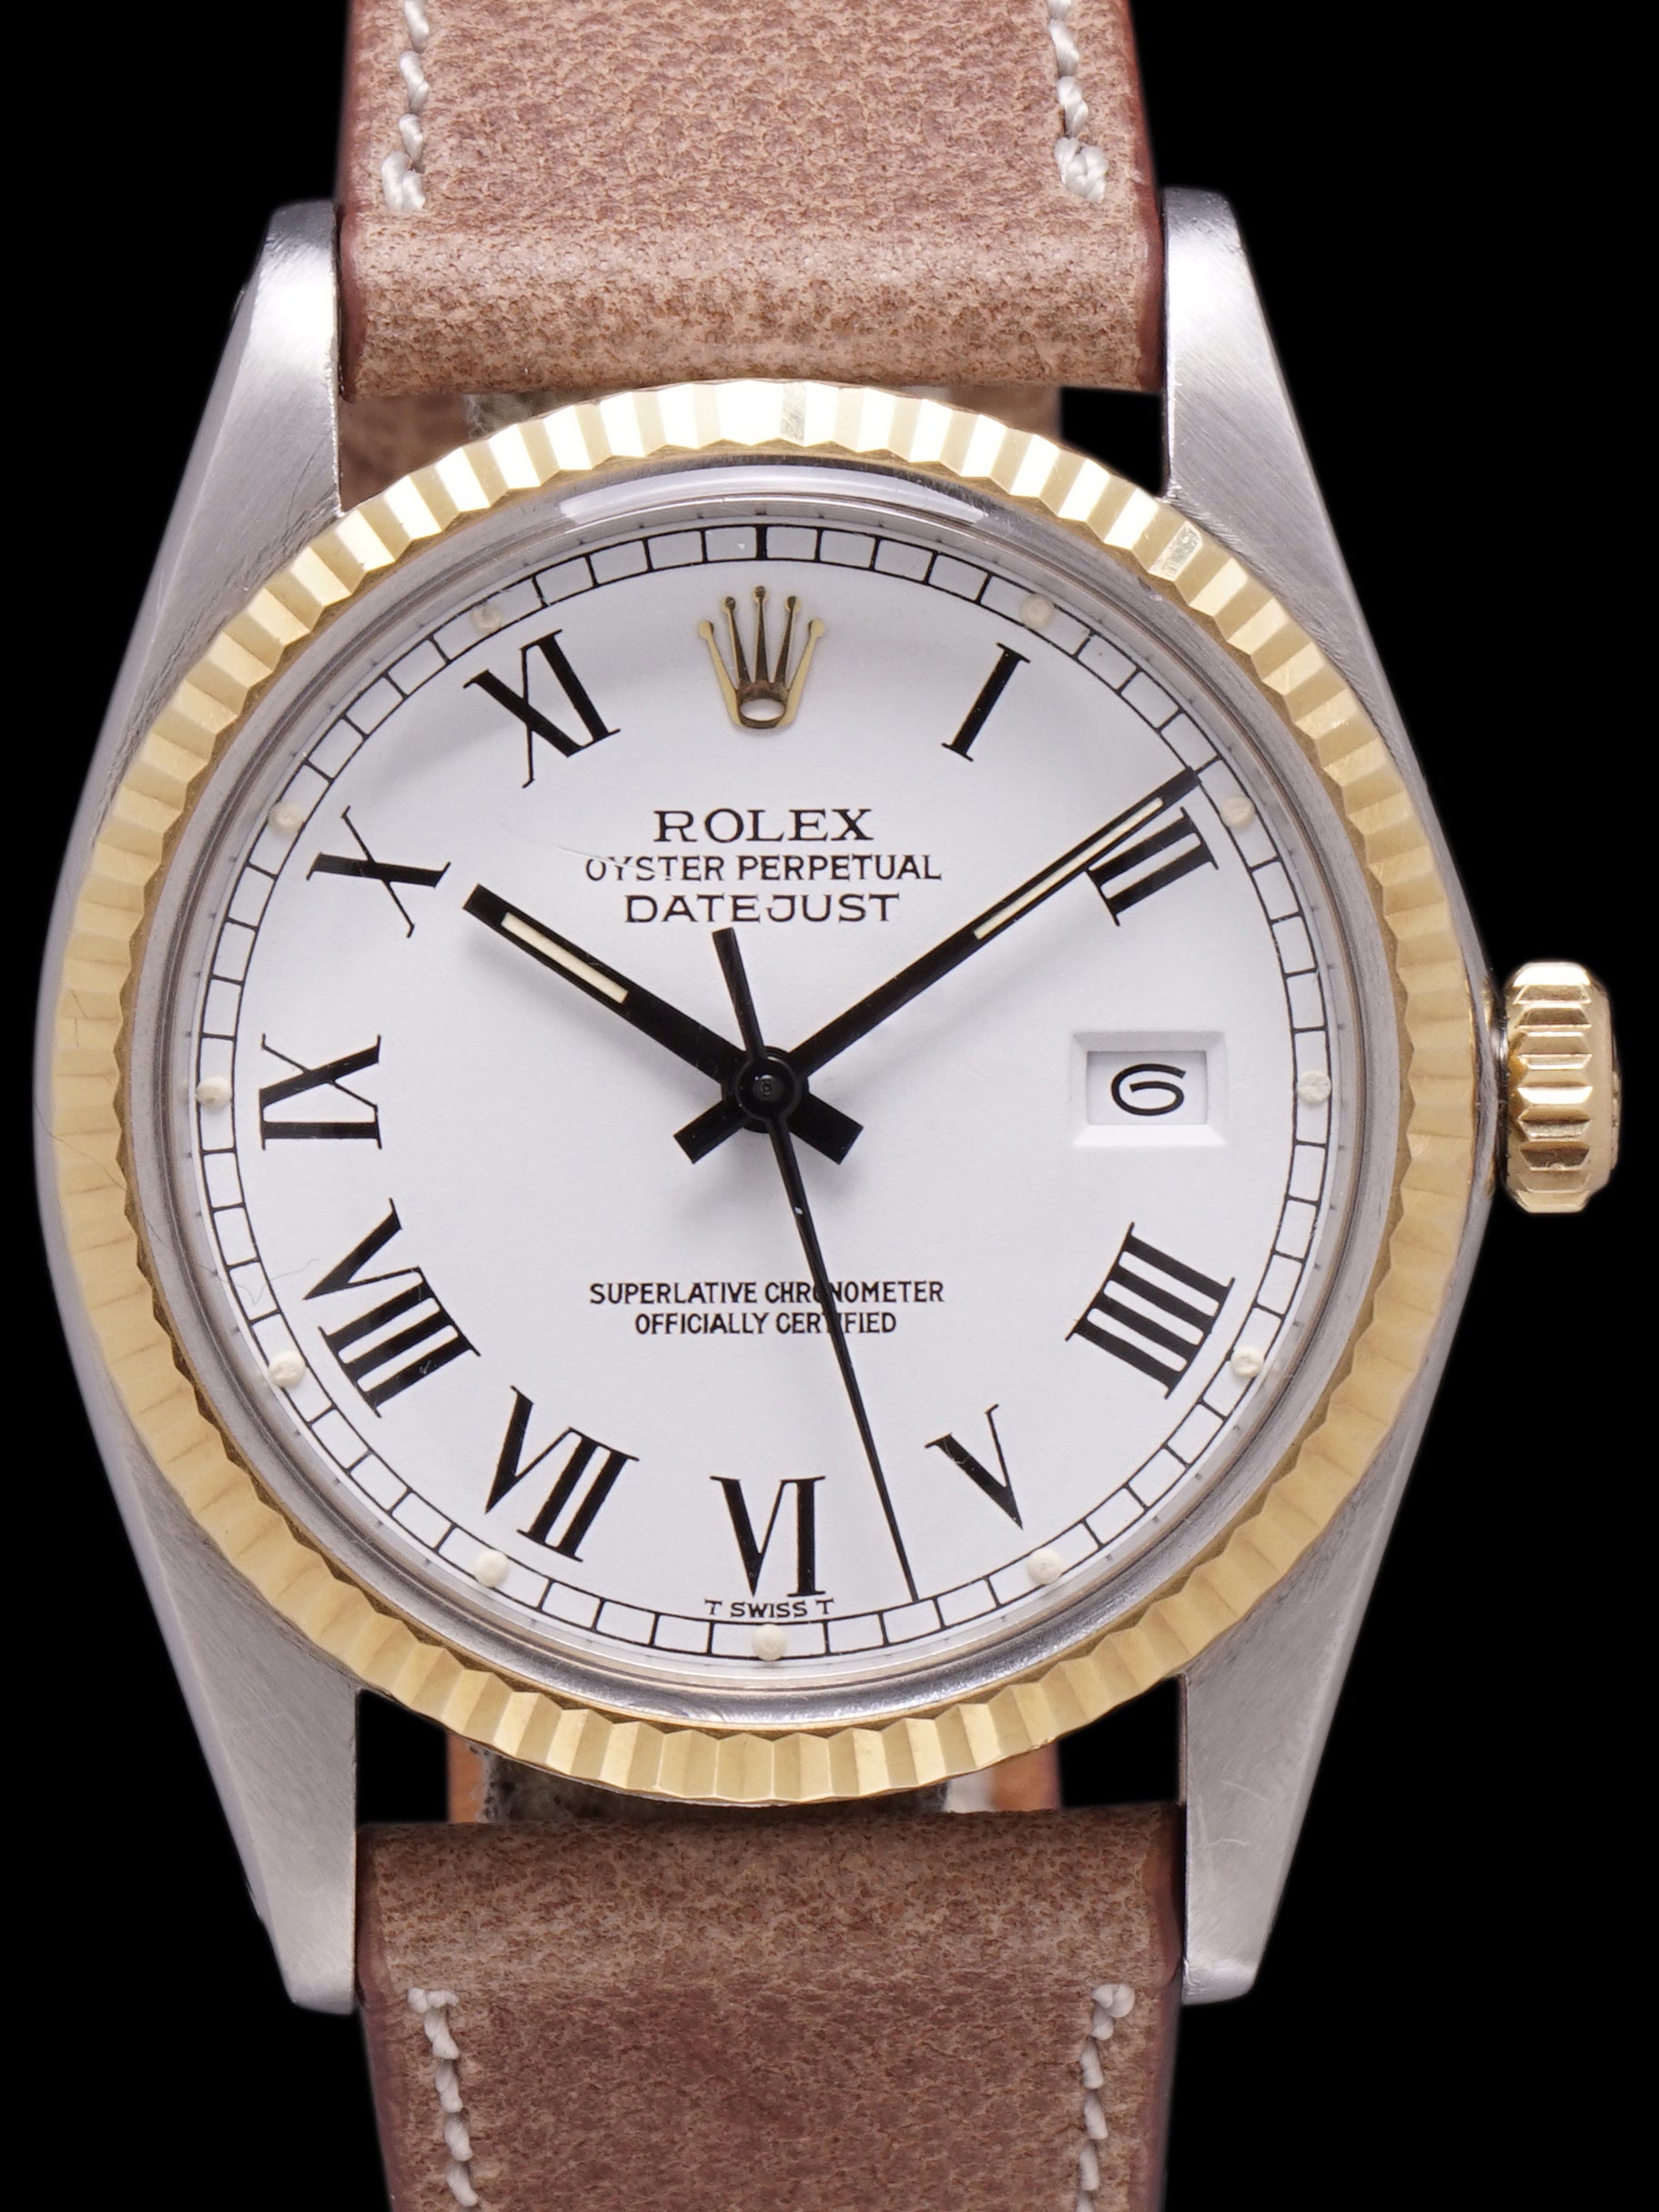 1984 Rolex Two-Tone Datejust (Ref. 16013) "Buckley Dial"